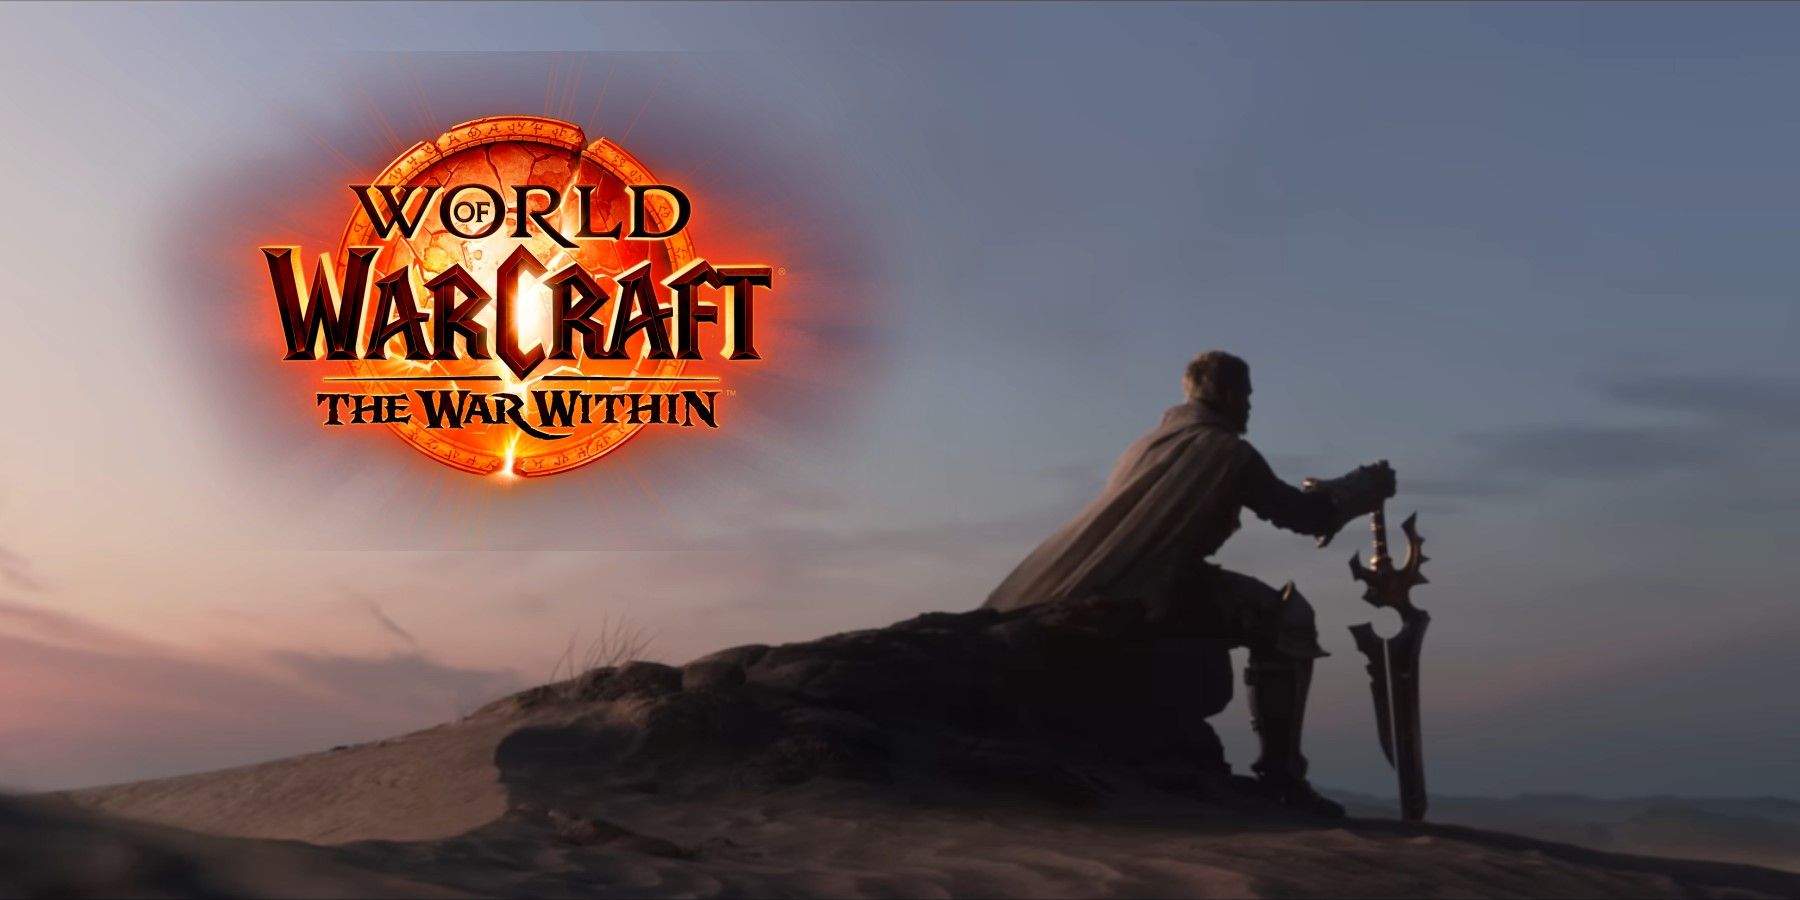 anduin from the war within cinematic sitting with the logo over him